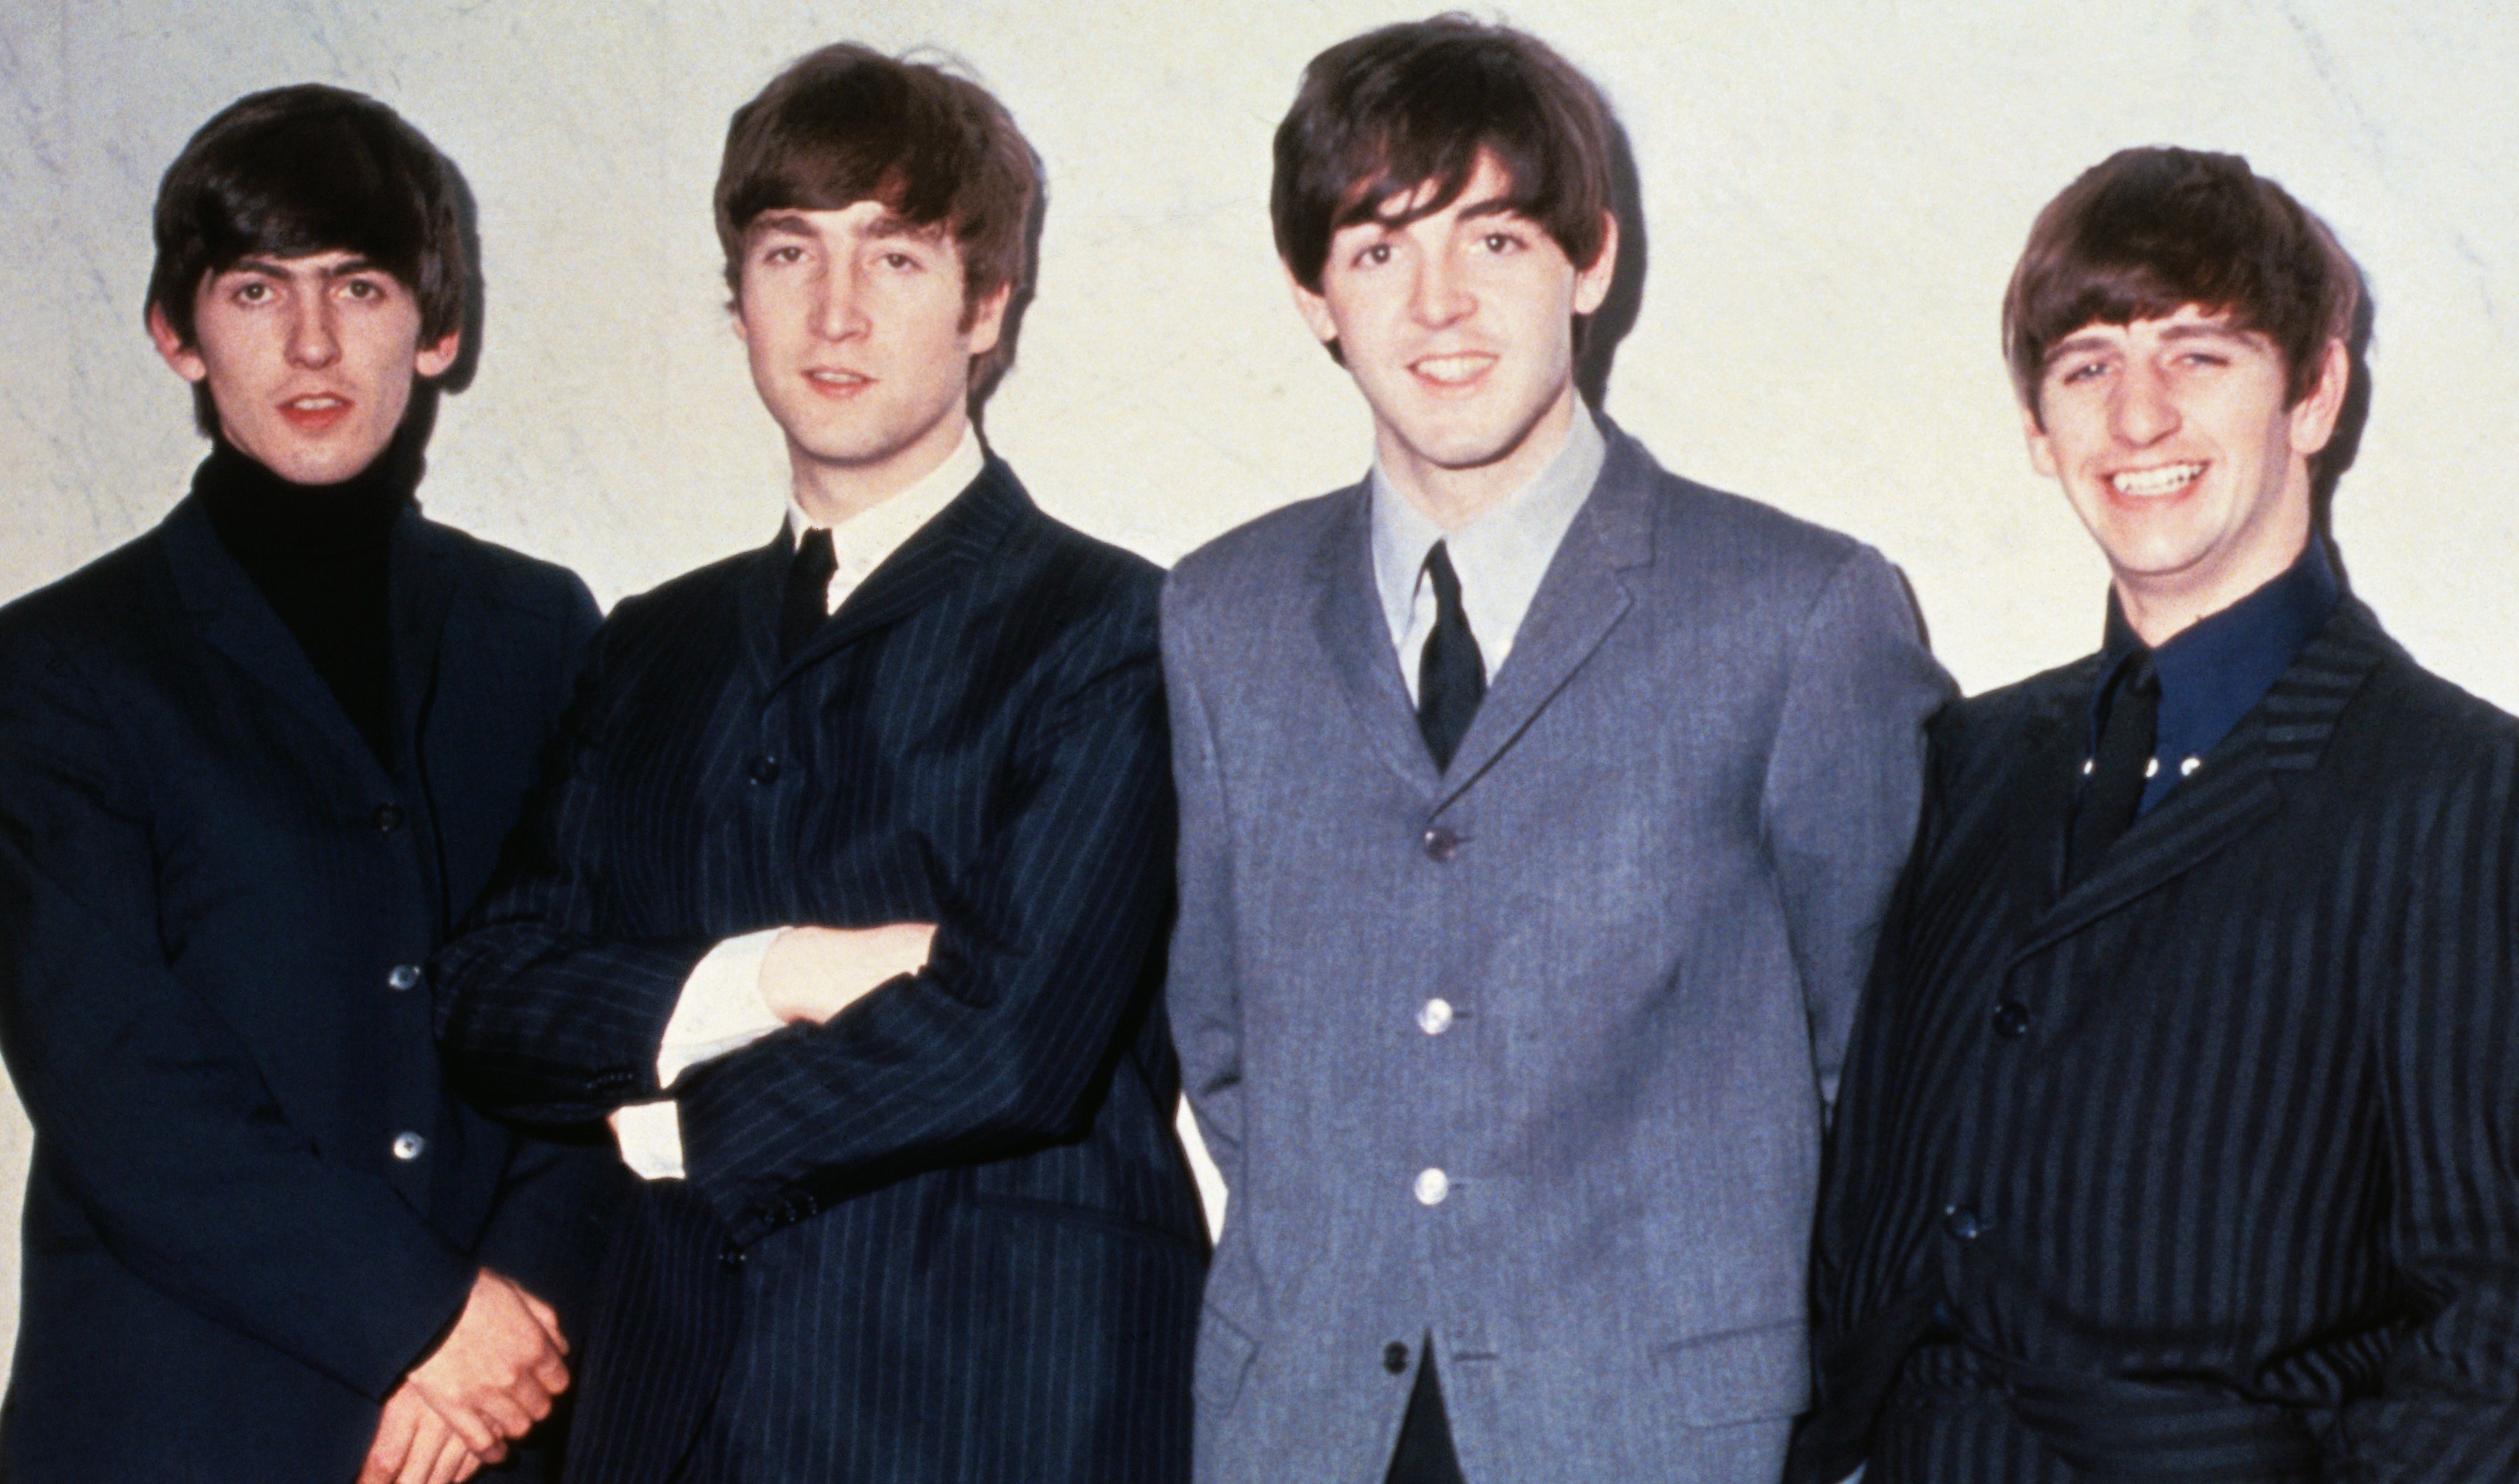 The Beatles in suits during the "Love Me Do" era